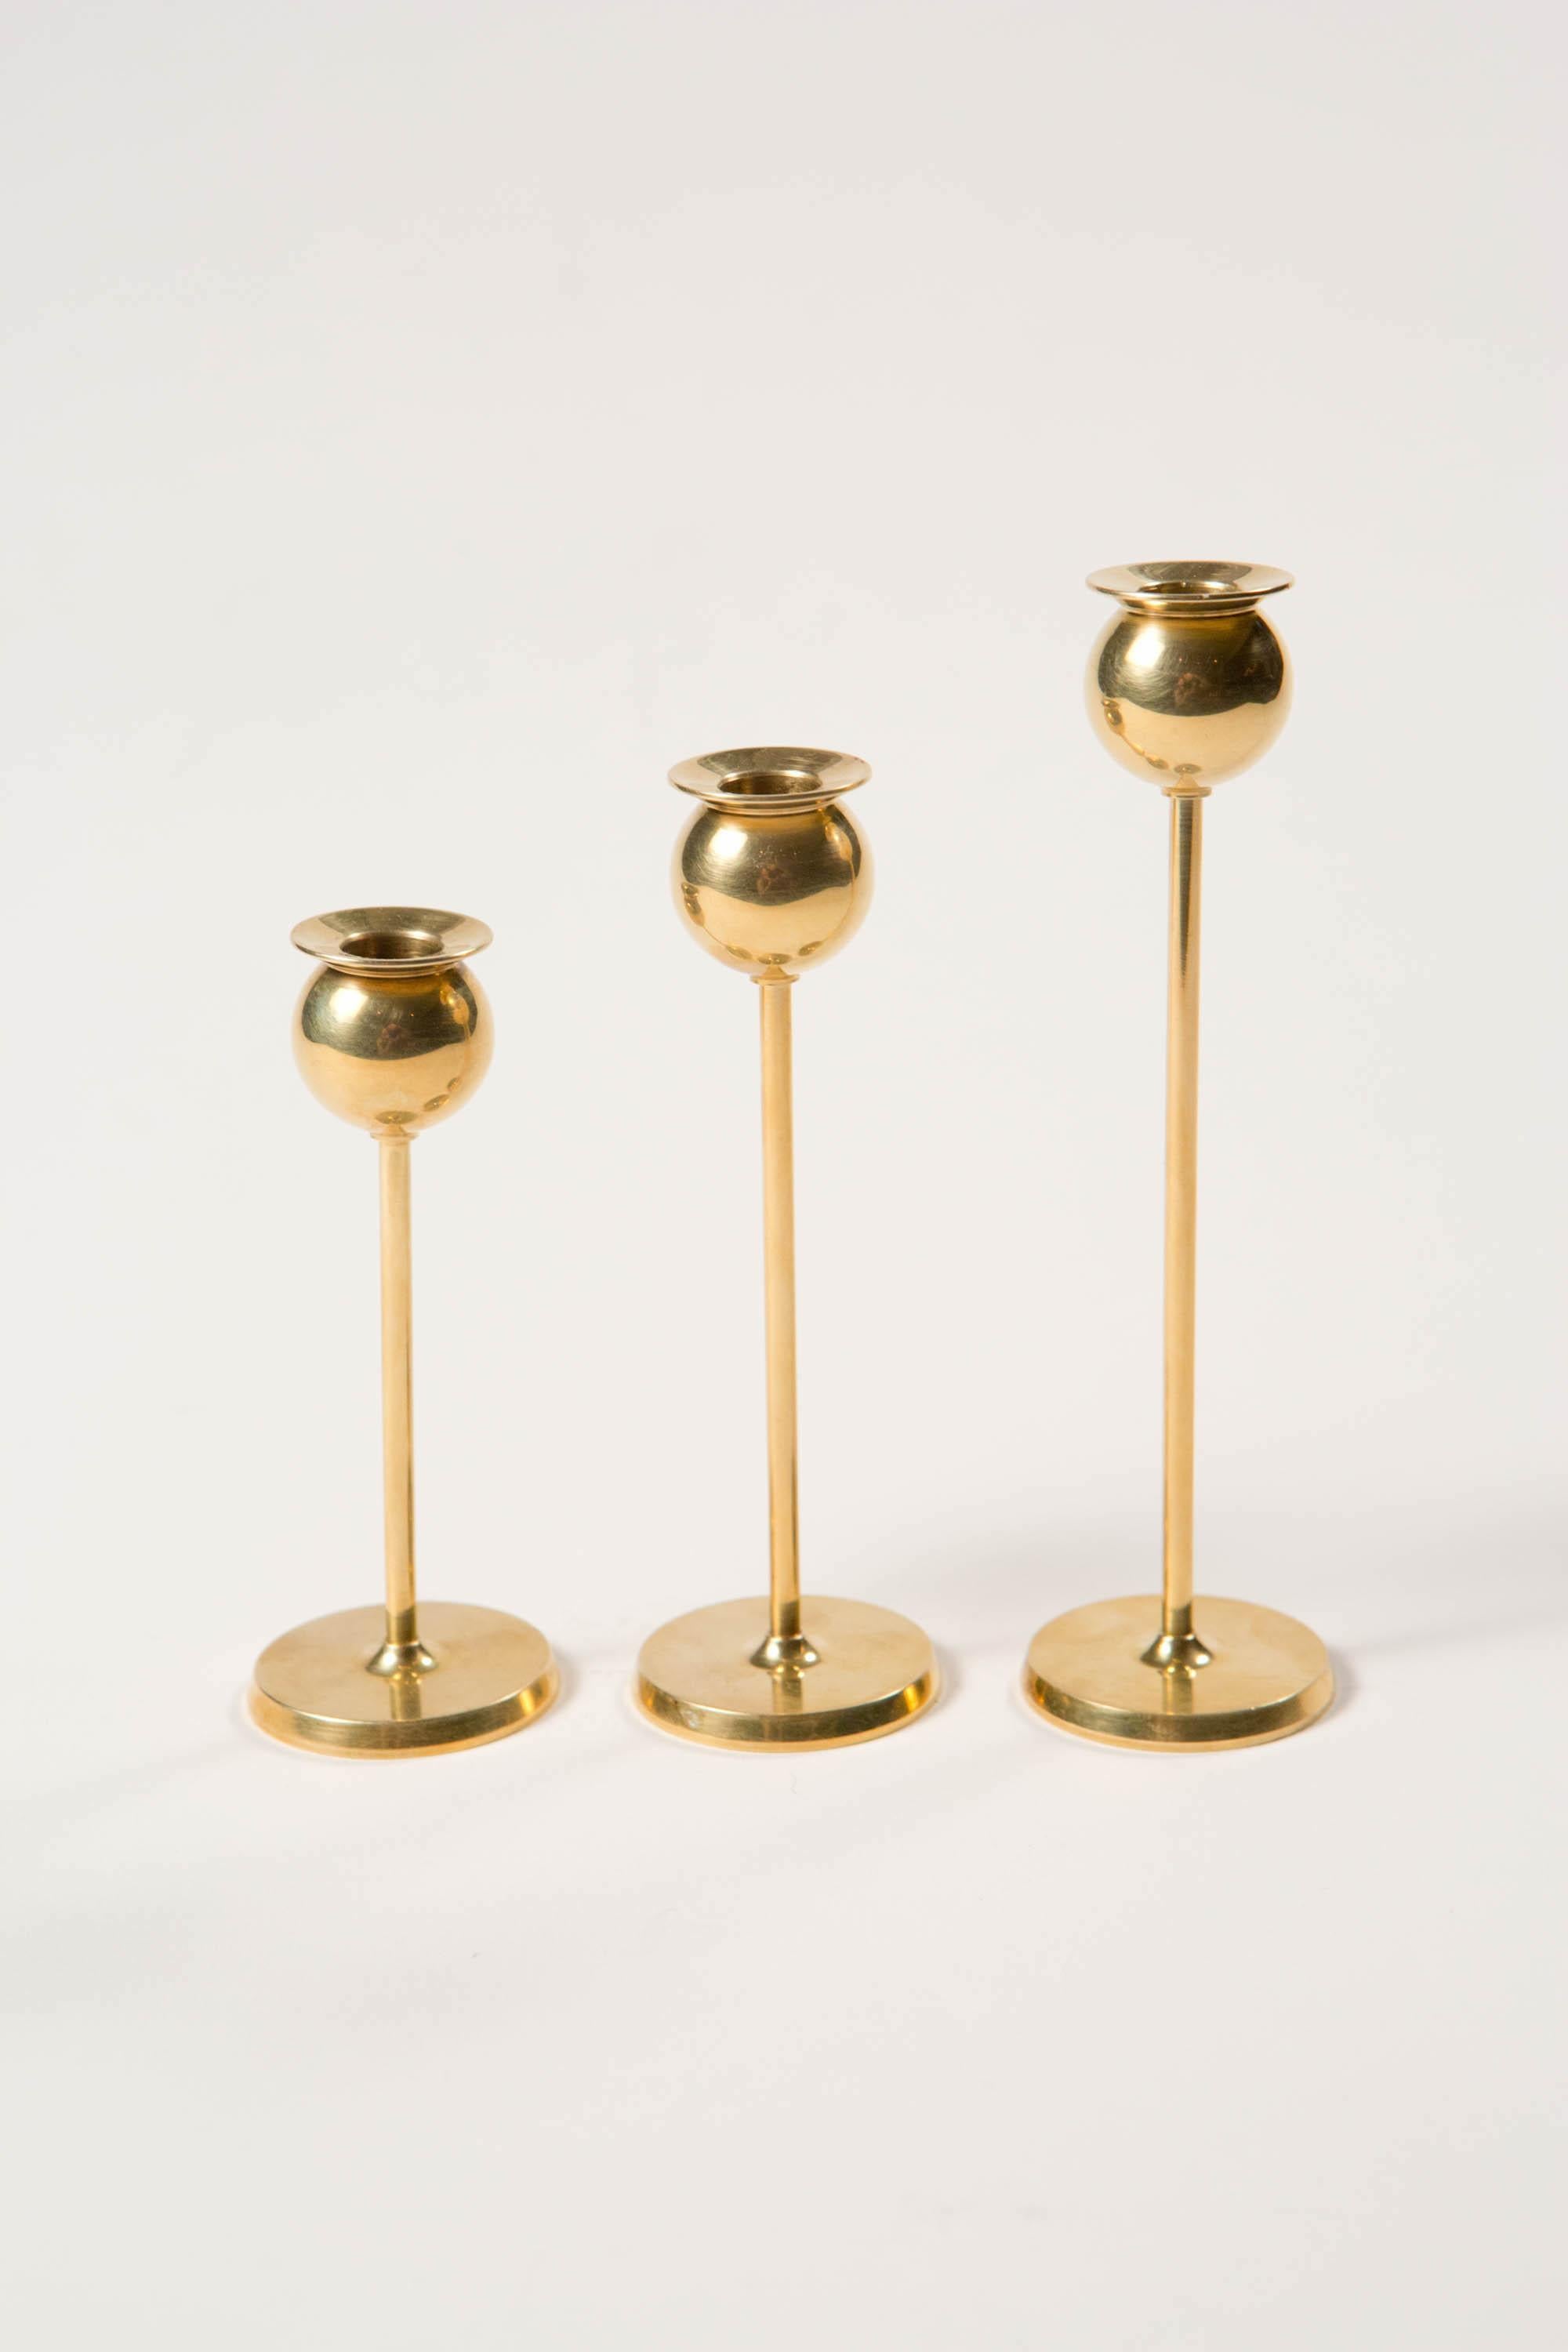 Pierre Forsell Set of 3 Small Brass Tulip Candleholders -  Skultuna Sweden 1970s

Set of 3 tulip candlesticks by Pierre Forsell for Skultuna, Sweden, 1970s.

Solid brass

Small set.

Measures: Heights 4.5in, 5in., 5.5in.